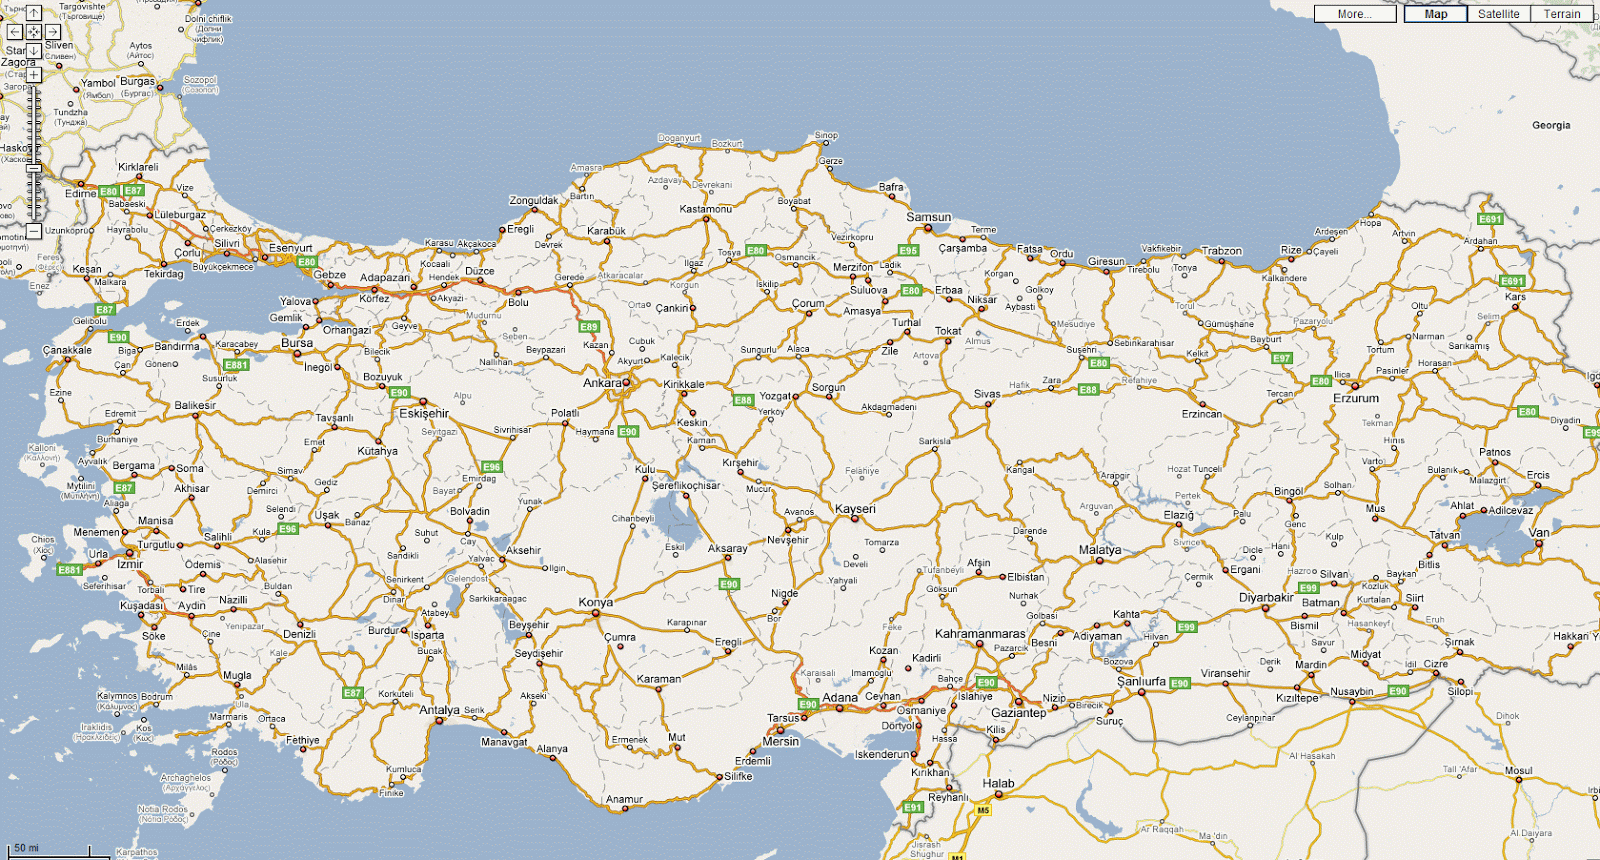 Political Map of Turkey Turkey Physical Political Maps of the City